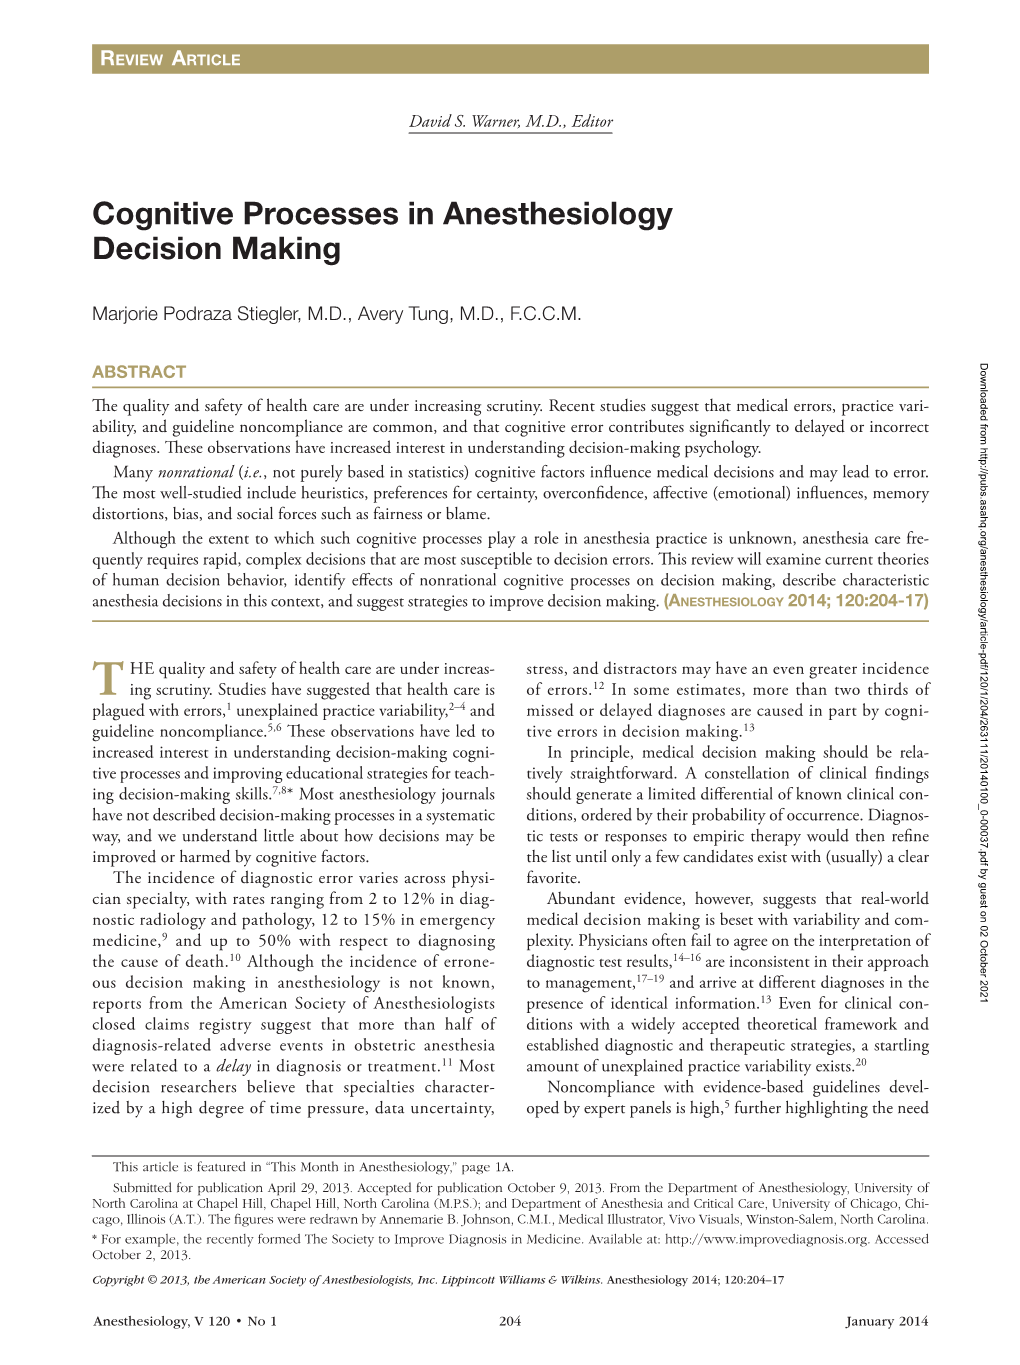 Cognitive Processes in Anesthesiology Decision Making